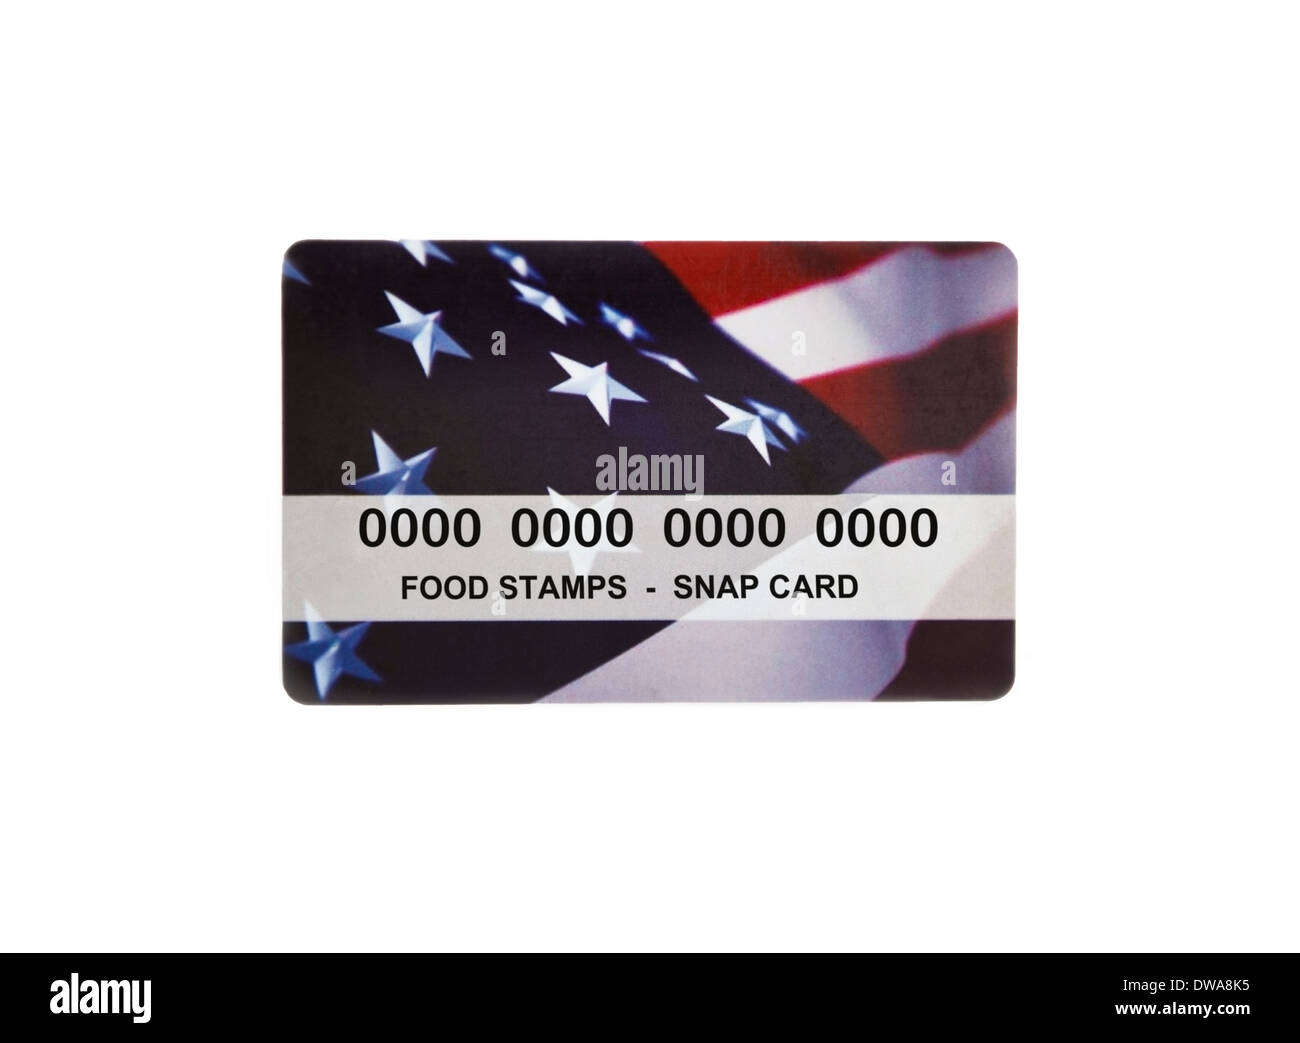 United States Food Stamp Program account card. Also known as Supplemental Nutrition Assistance Program (SNAP). Stock Photo